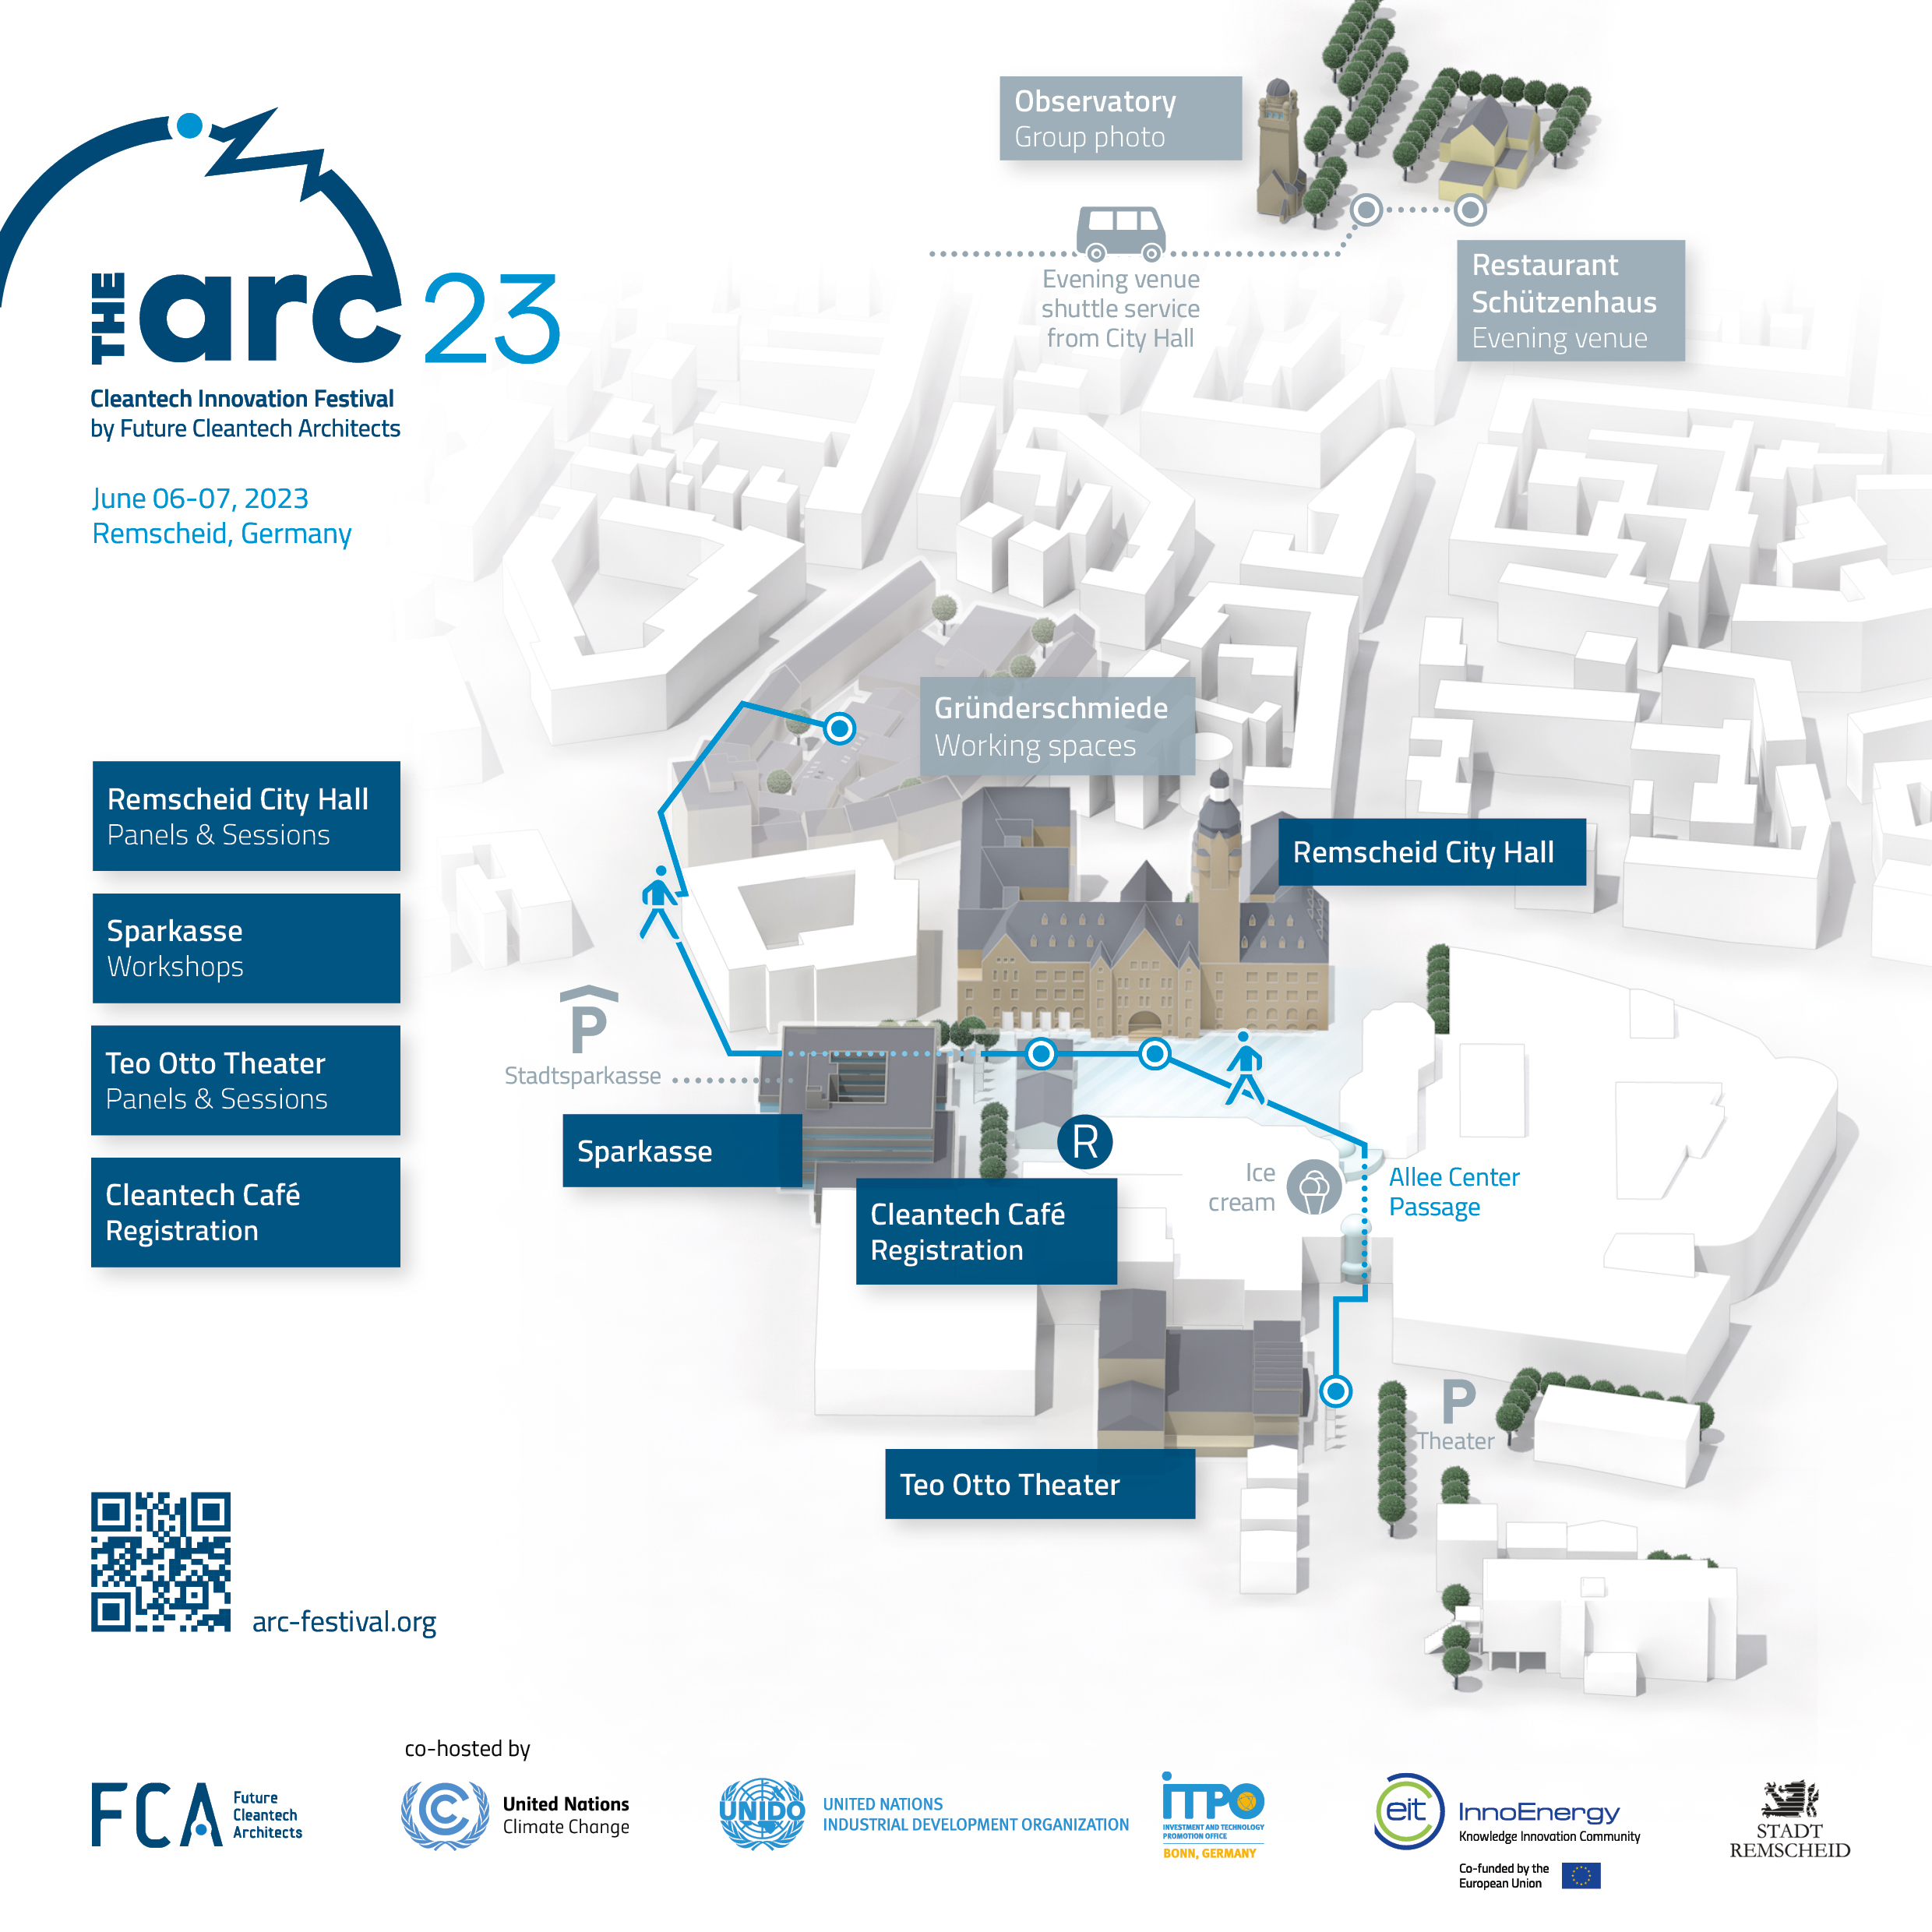 The ARC Cleantech Innovation Festival will be back in the city of Remscheid from June 6-7!